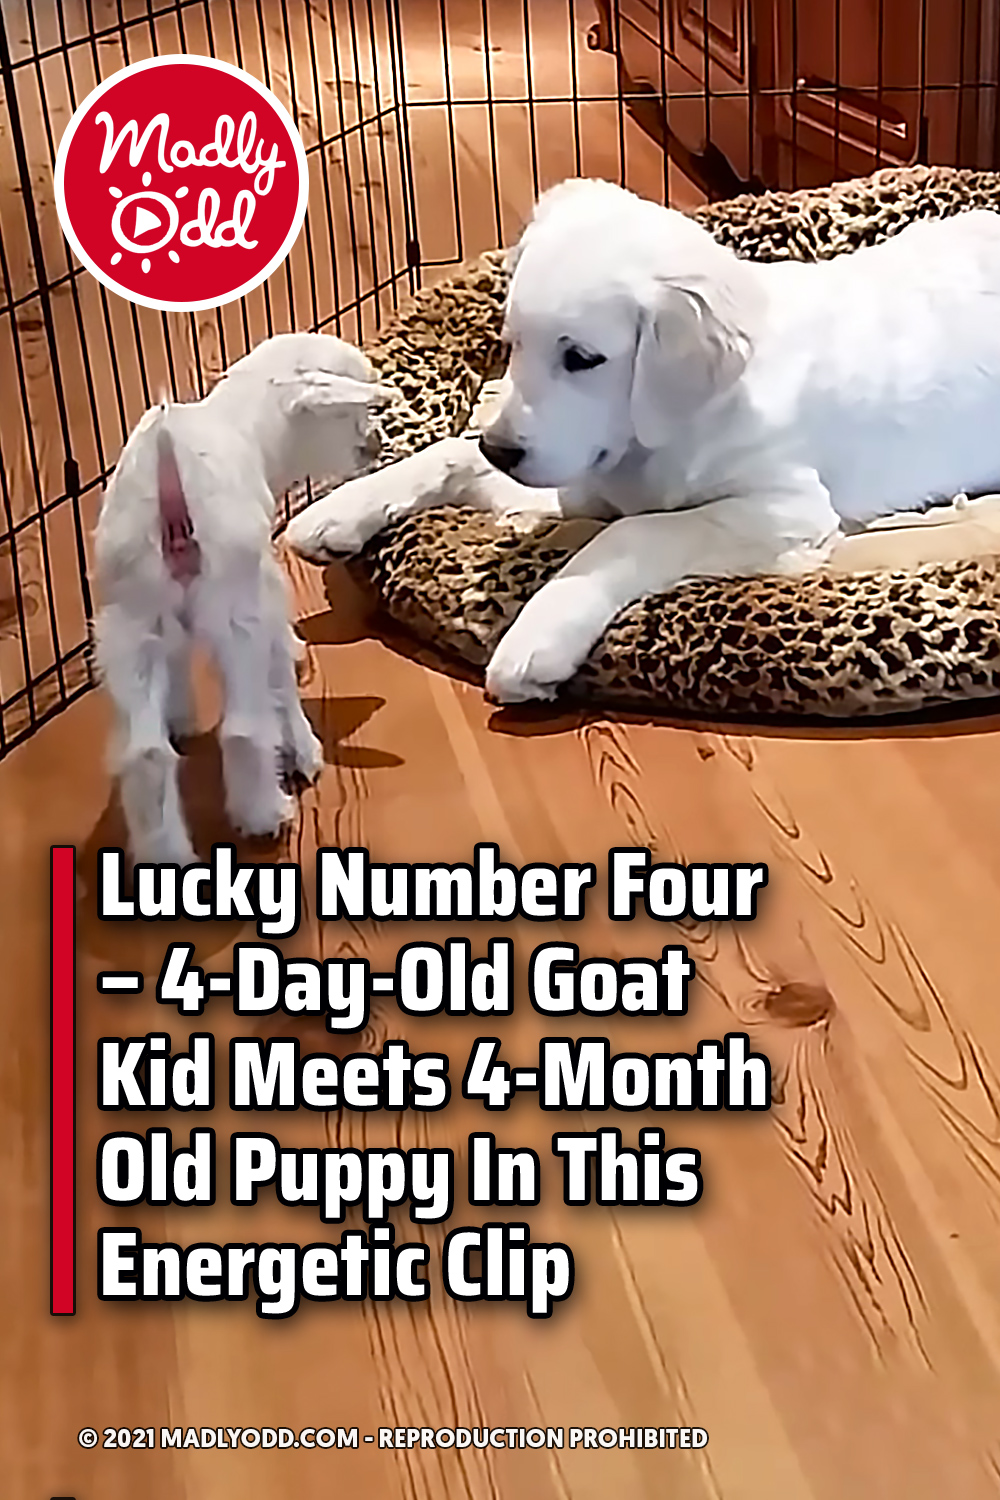 Lucky Number Four – 4-Day-Old Goat Kid Meets 4-Month Old Puppy In This Energetic Clip